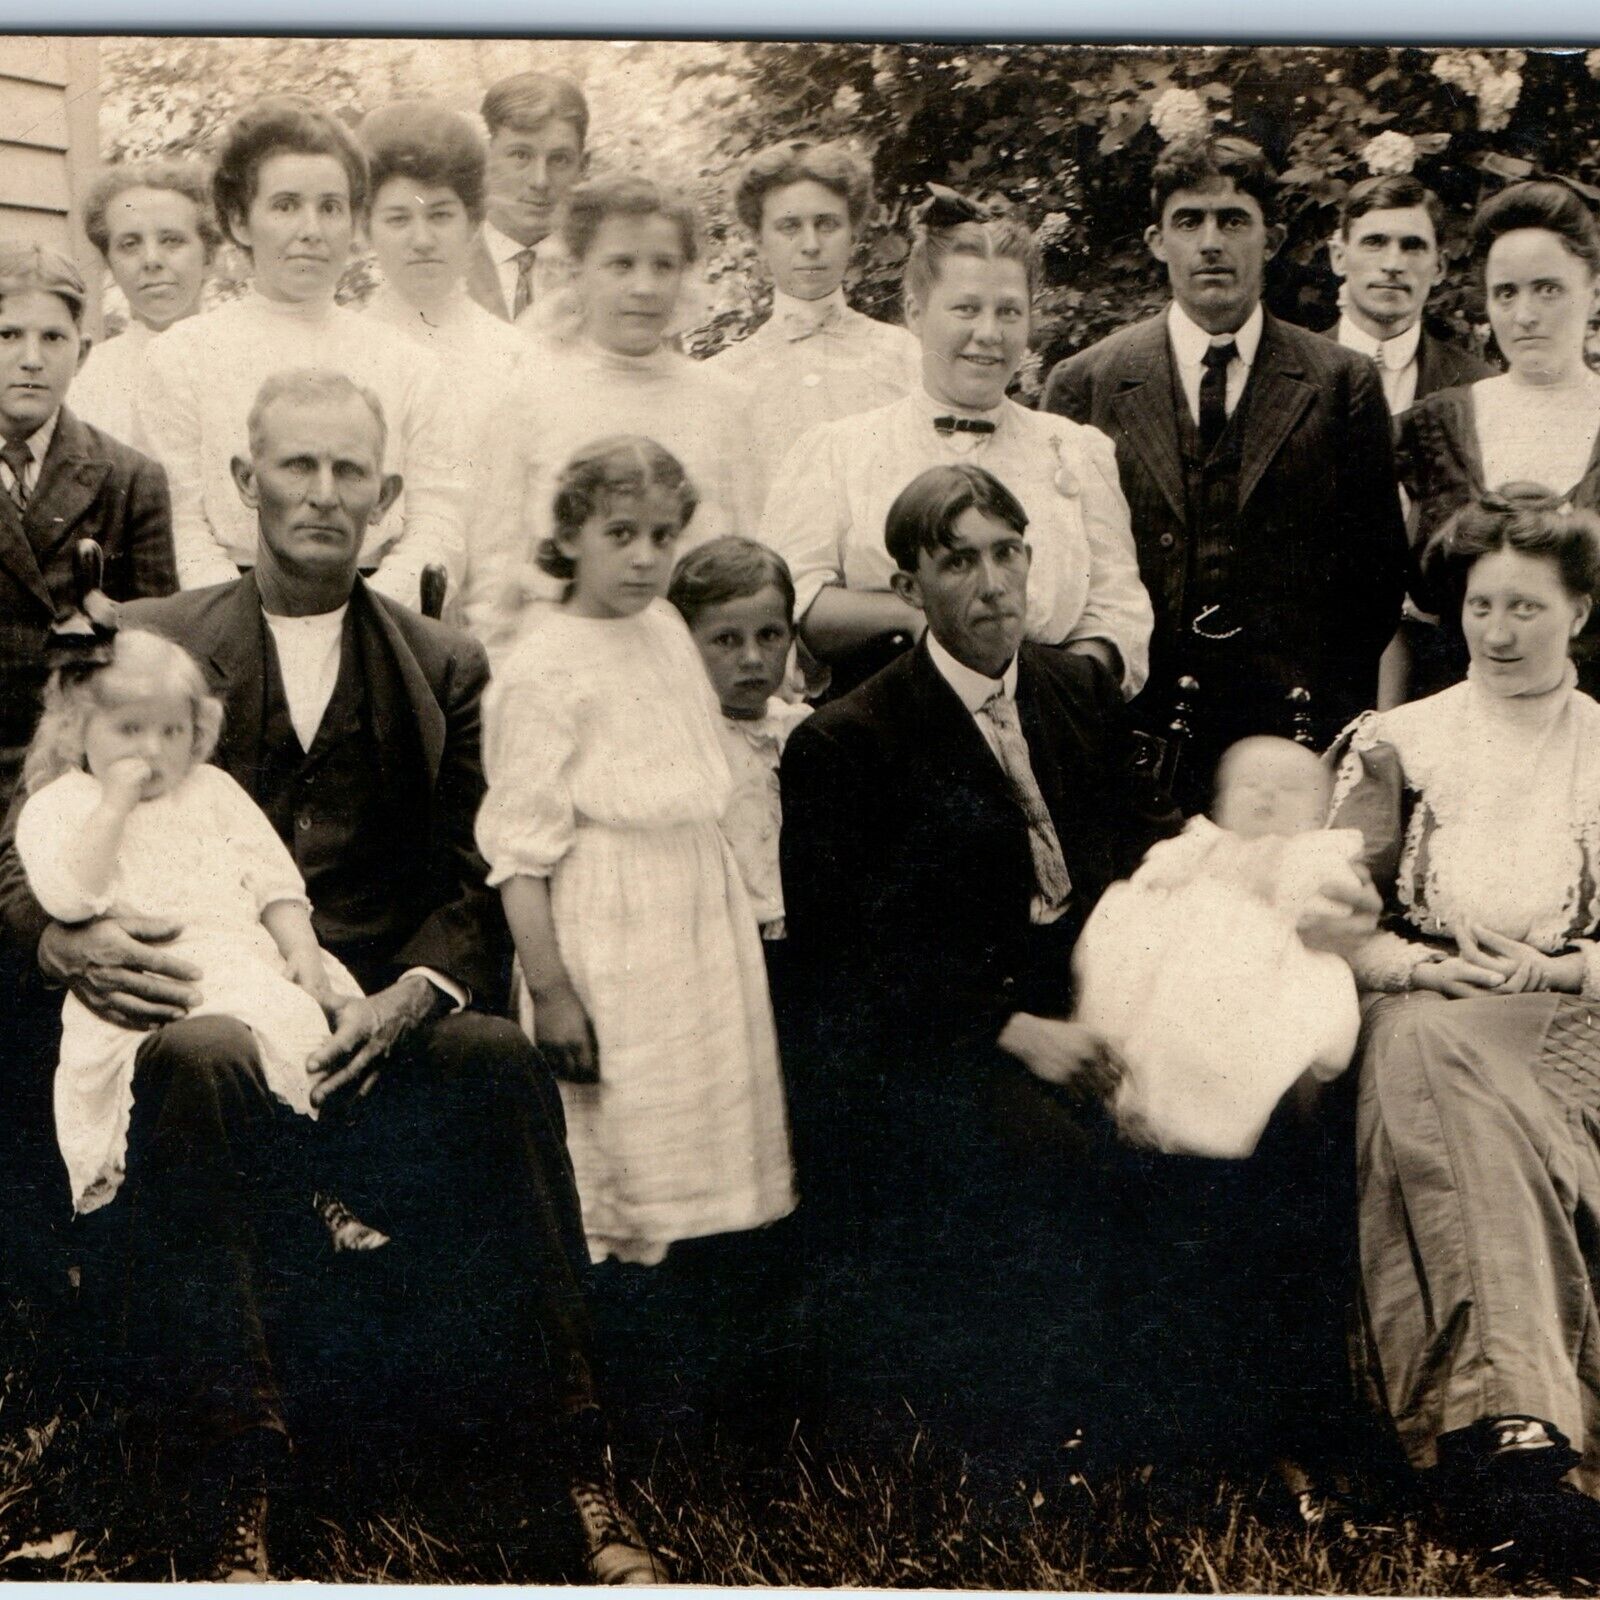 c1910s Large Group Outdoors RPPC Family House Kids Newborn Baby Real Photo A261